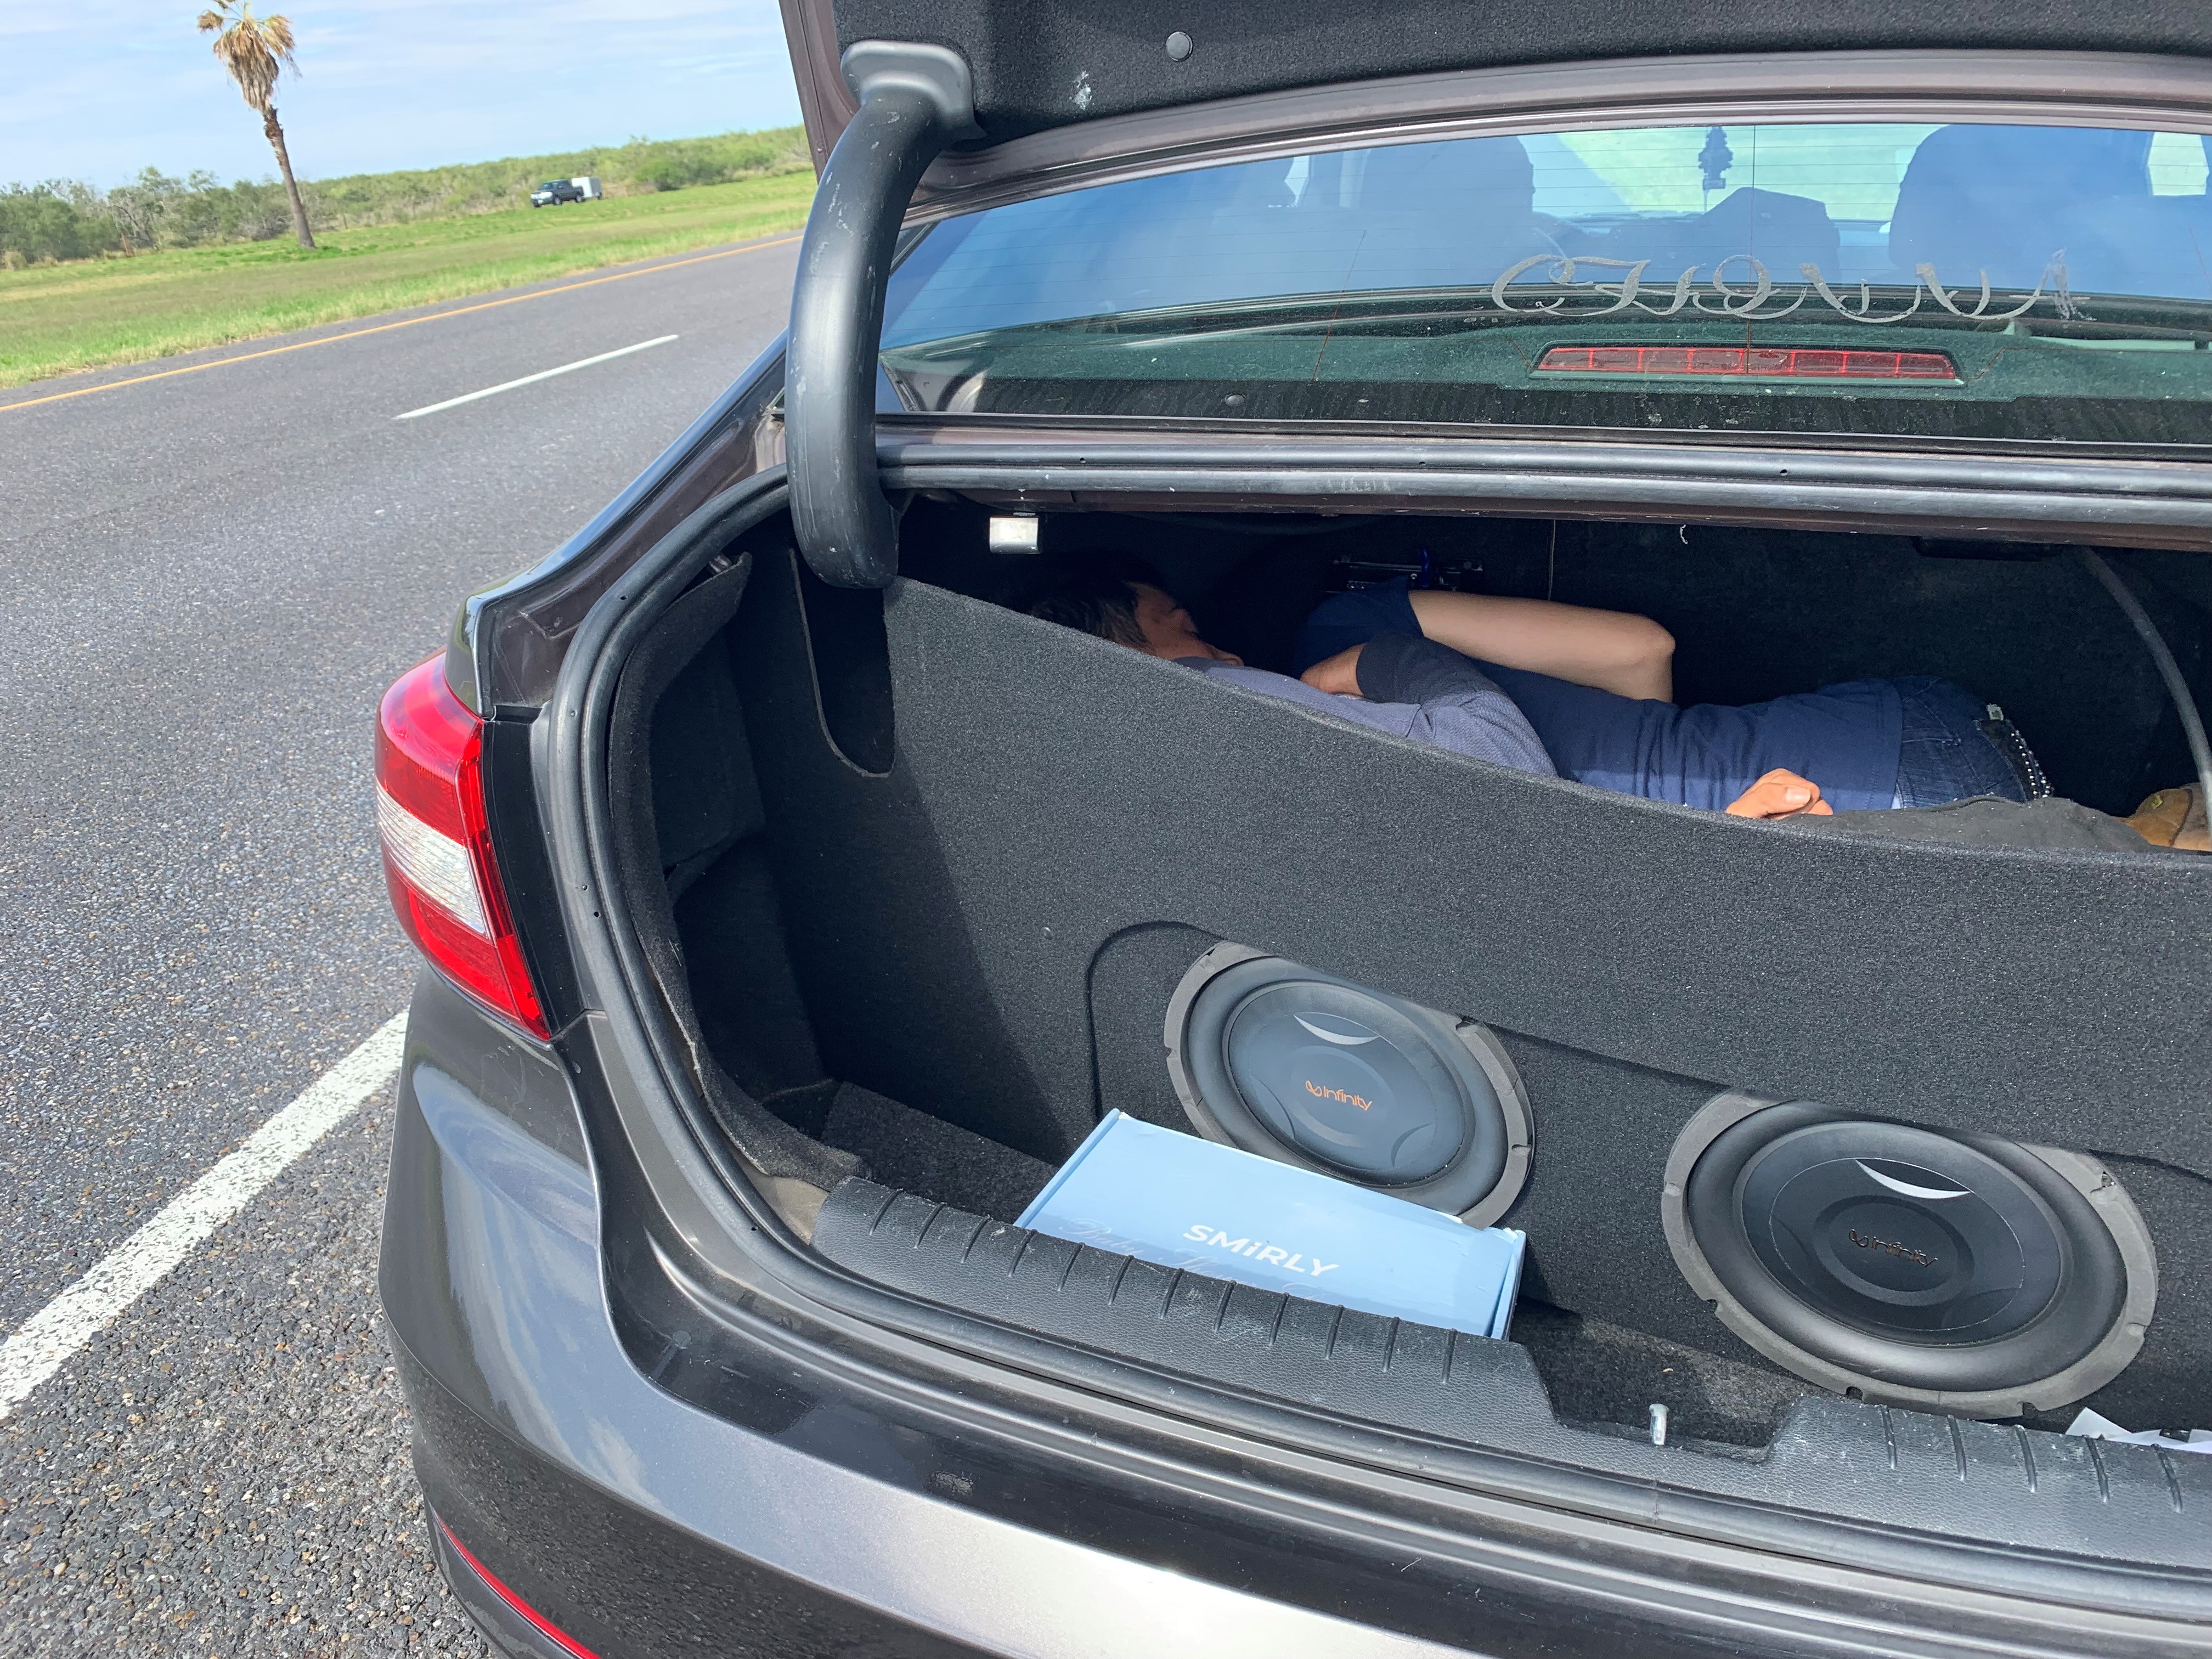 Texas DPS on X: Last week, during a traffic stop in Edinburg, DPS Troopers  encountered a smuggler who had two individuals hiding behind a radio speaker  in the trunk of the vehicle.